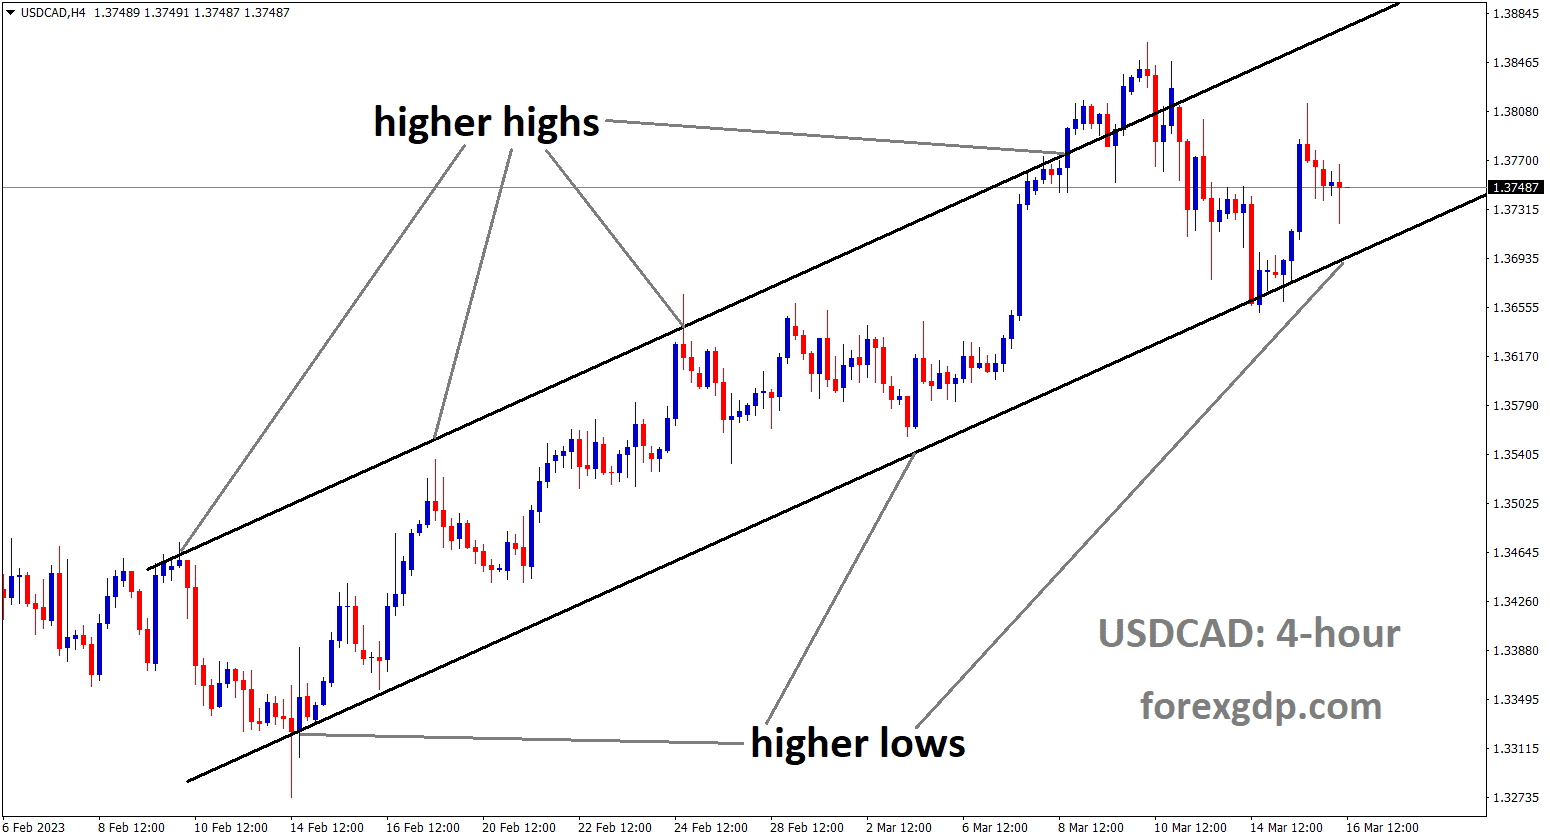 USDCAD is moving an Ascending channel and the market has reached the higher low area of the channel.